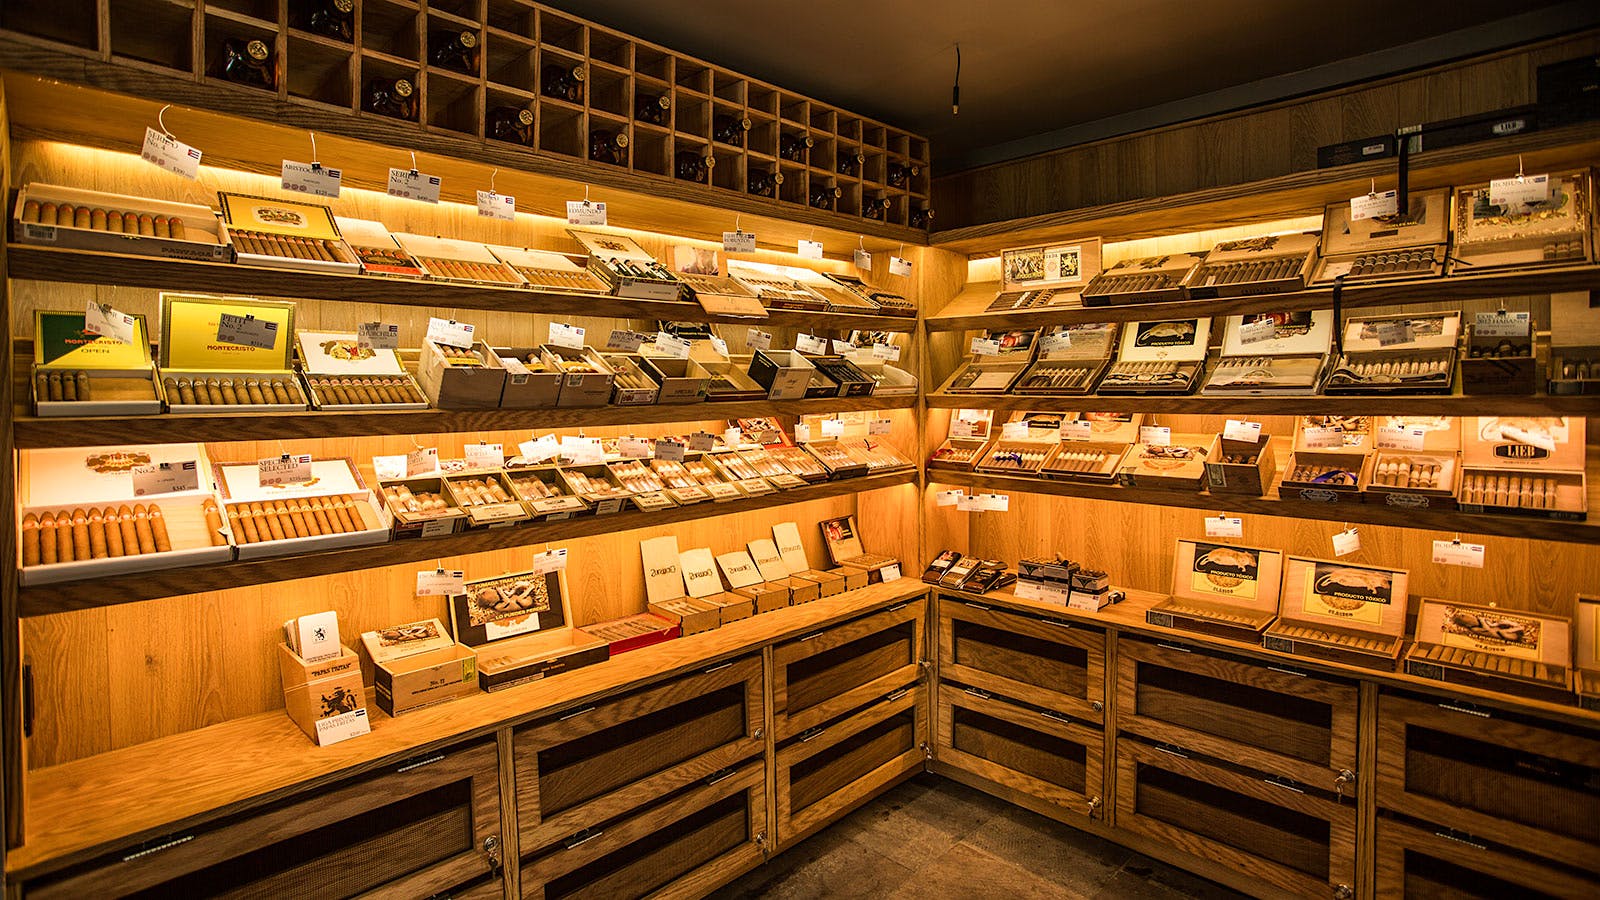 The walk-in humidor is stocked with a variety of Cuban and non-Cuban cigars.